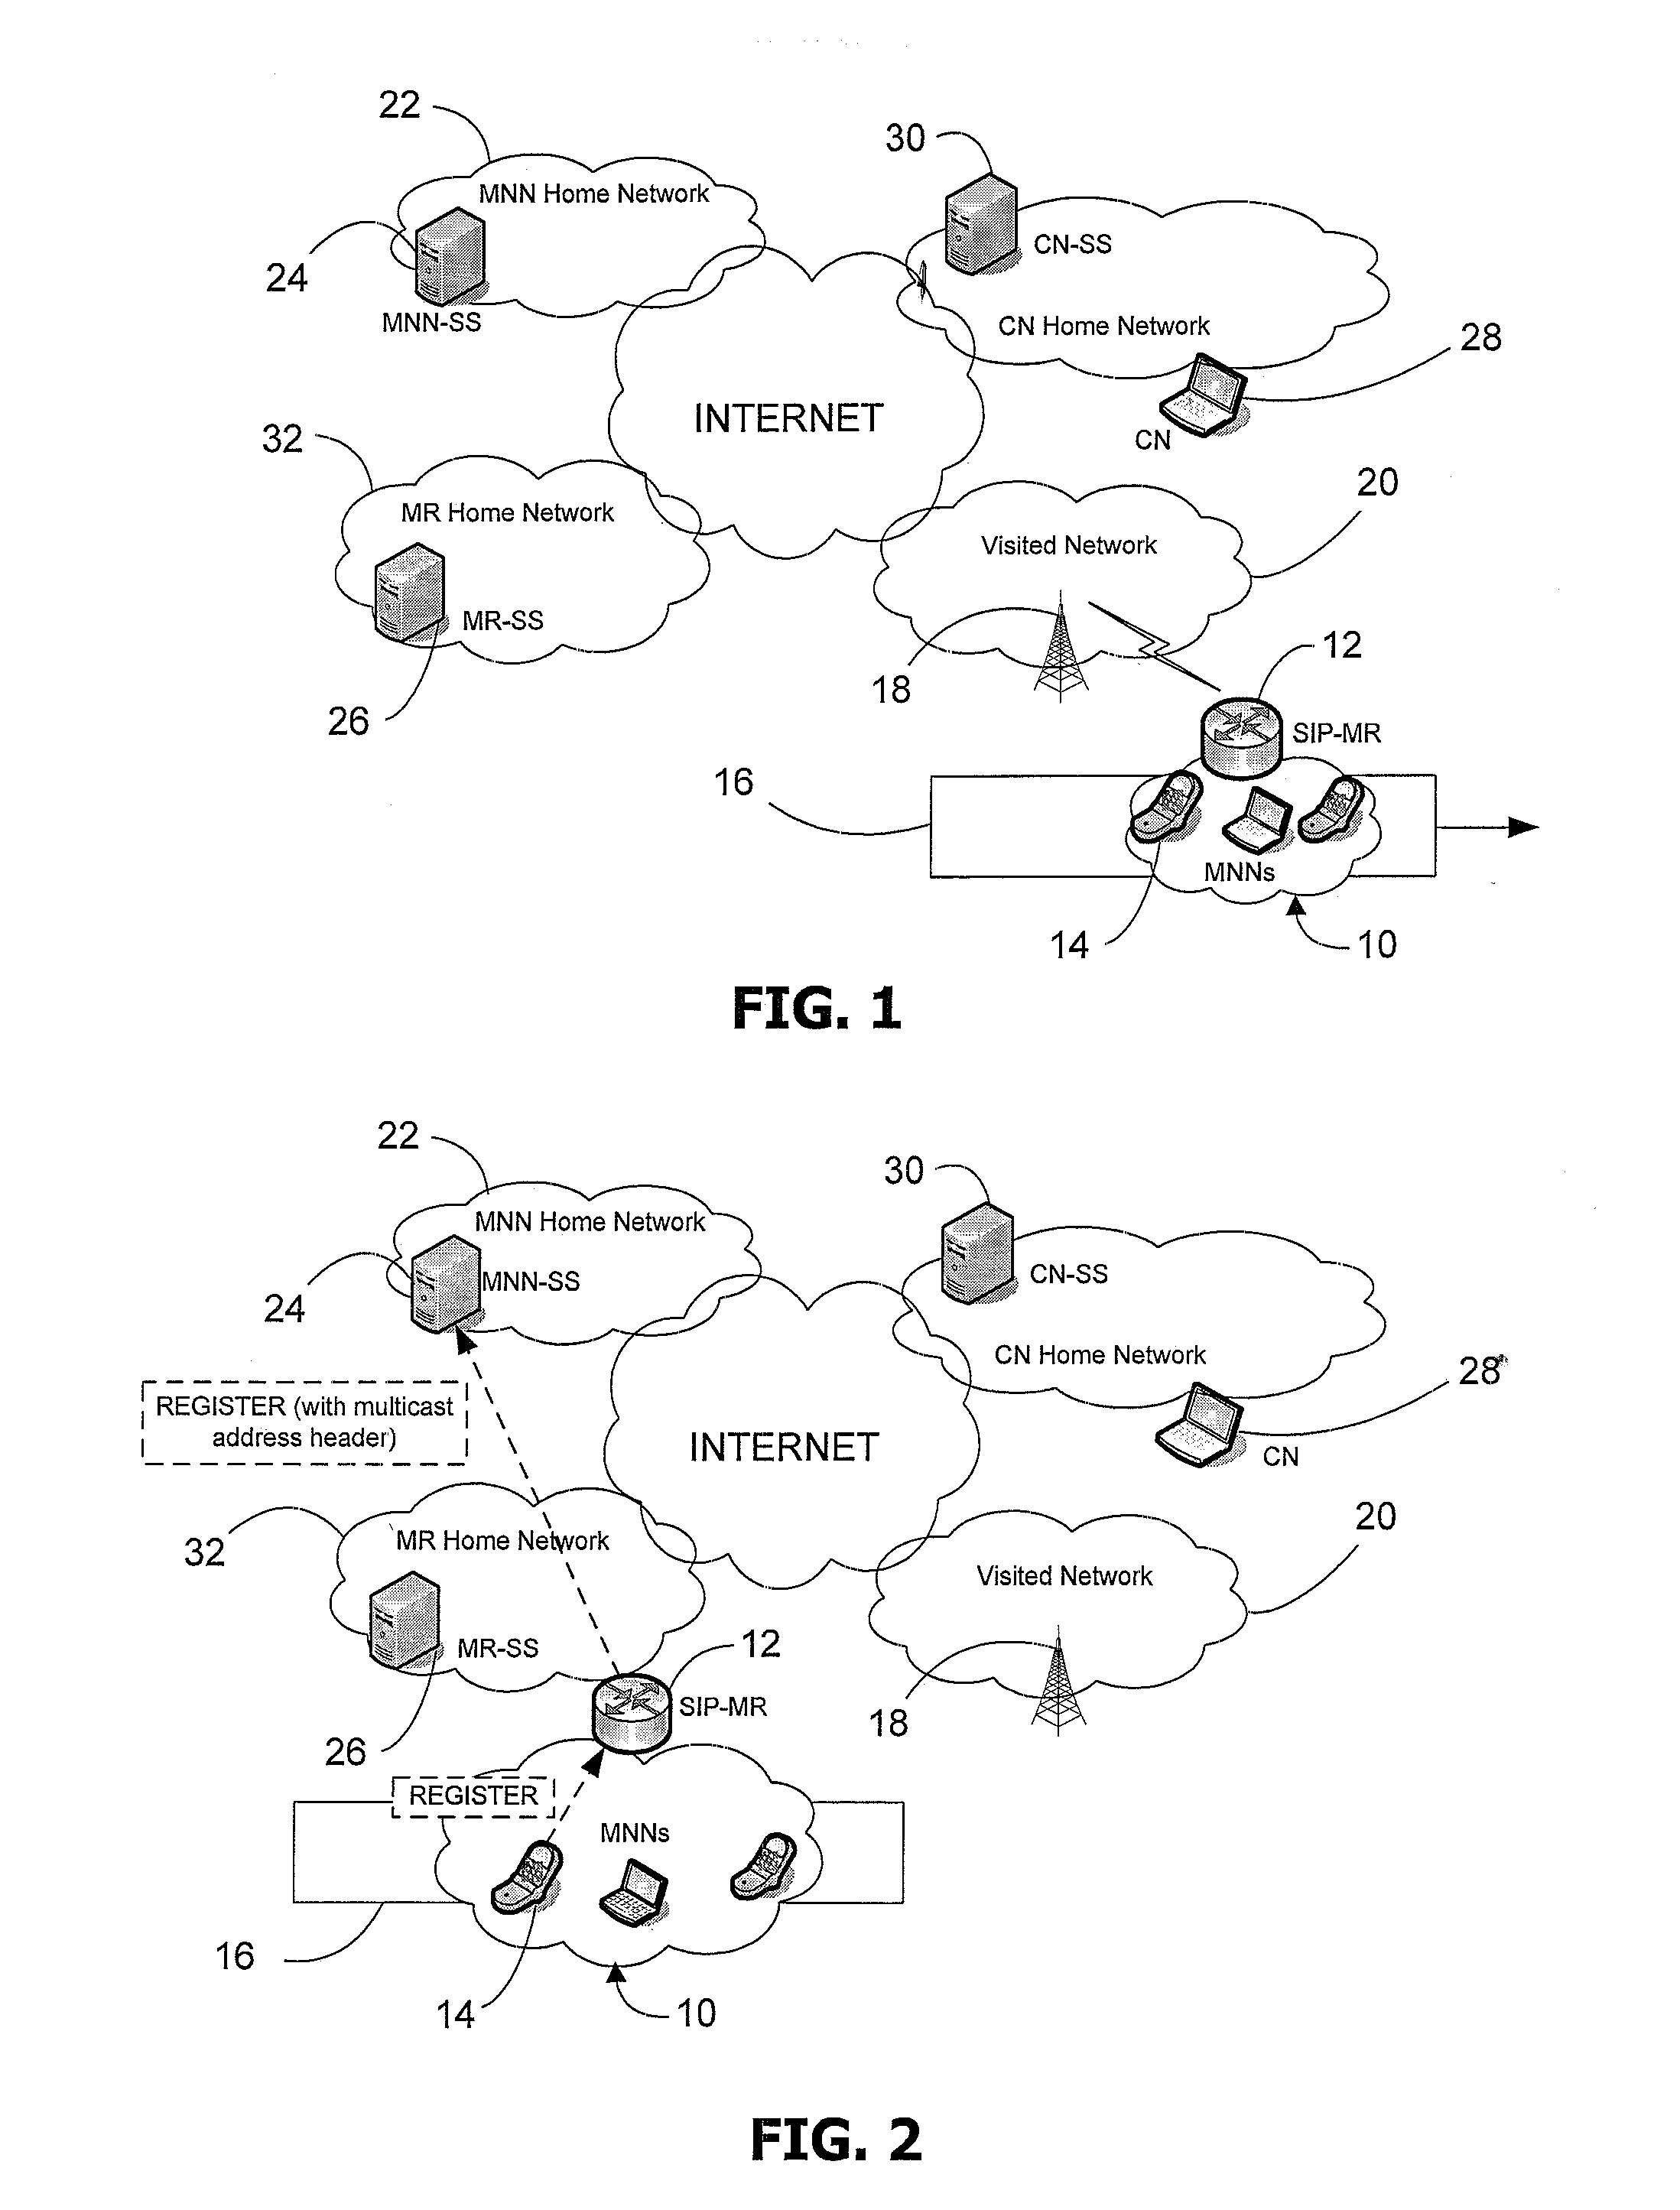 Systems and Methods for Improving Network Mobility